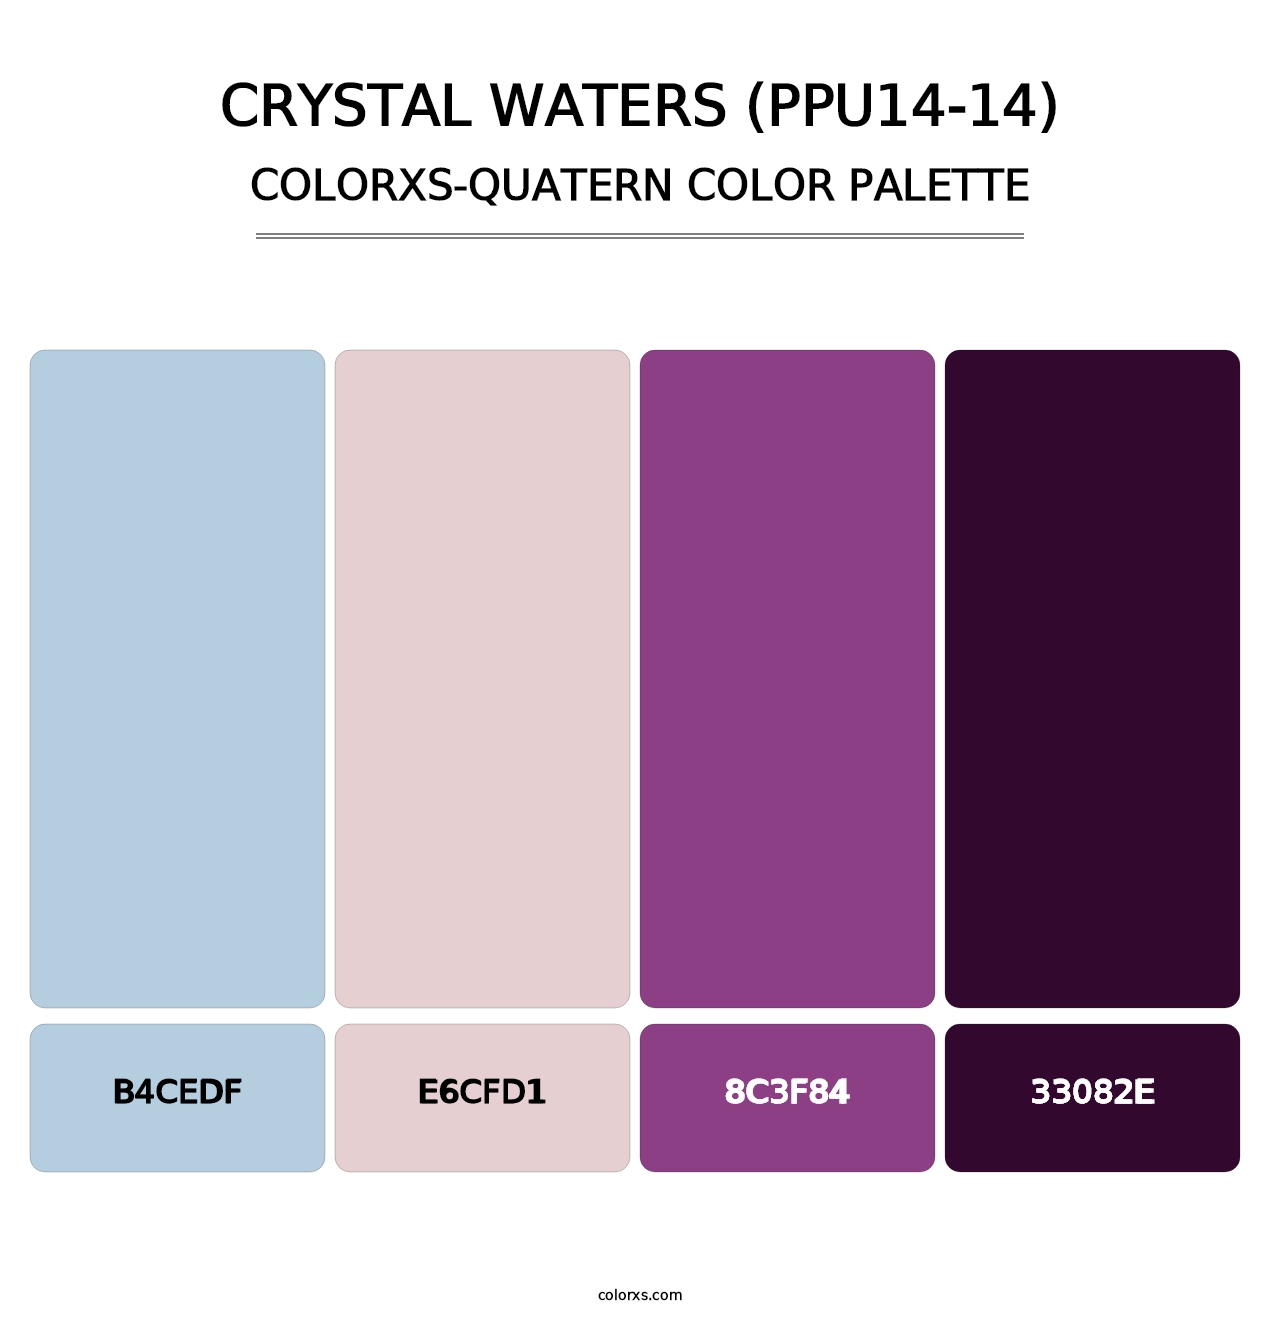 Crystal Waters (PPU14-14) - Colorxs Quatern Palette